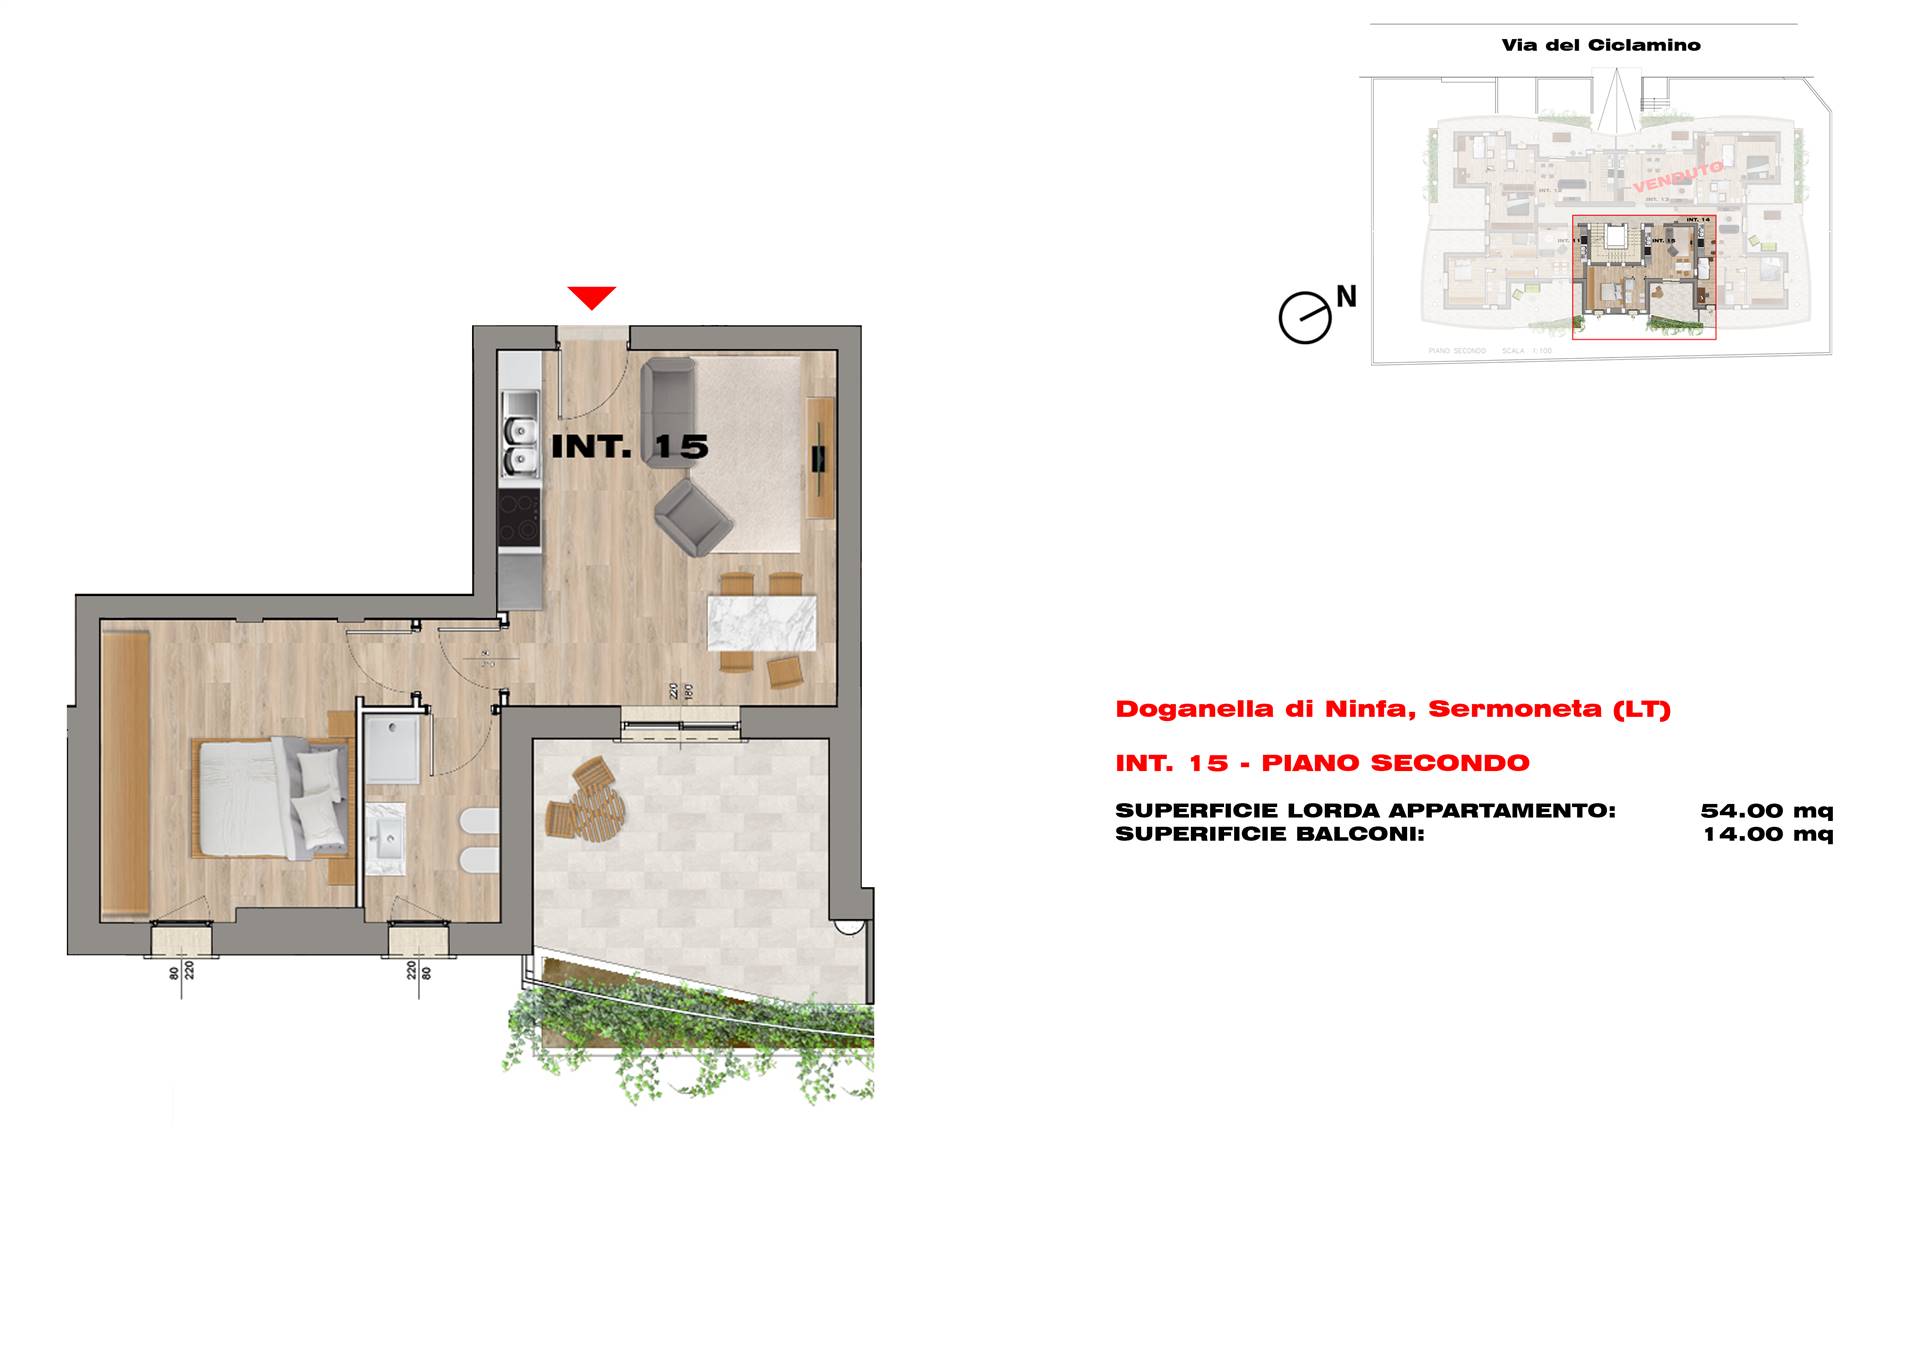 BIVIO DI DOGANELLA, SERMONETA, Apartment for sale of 54 Sq. mt., New construction, Heating Centralized, placed at 2° on 3, composed by: 2 Rooms, 